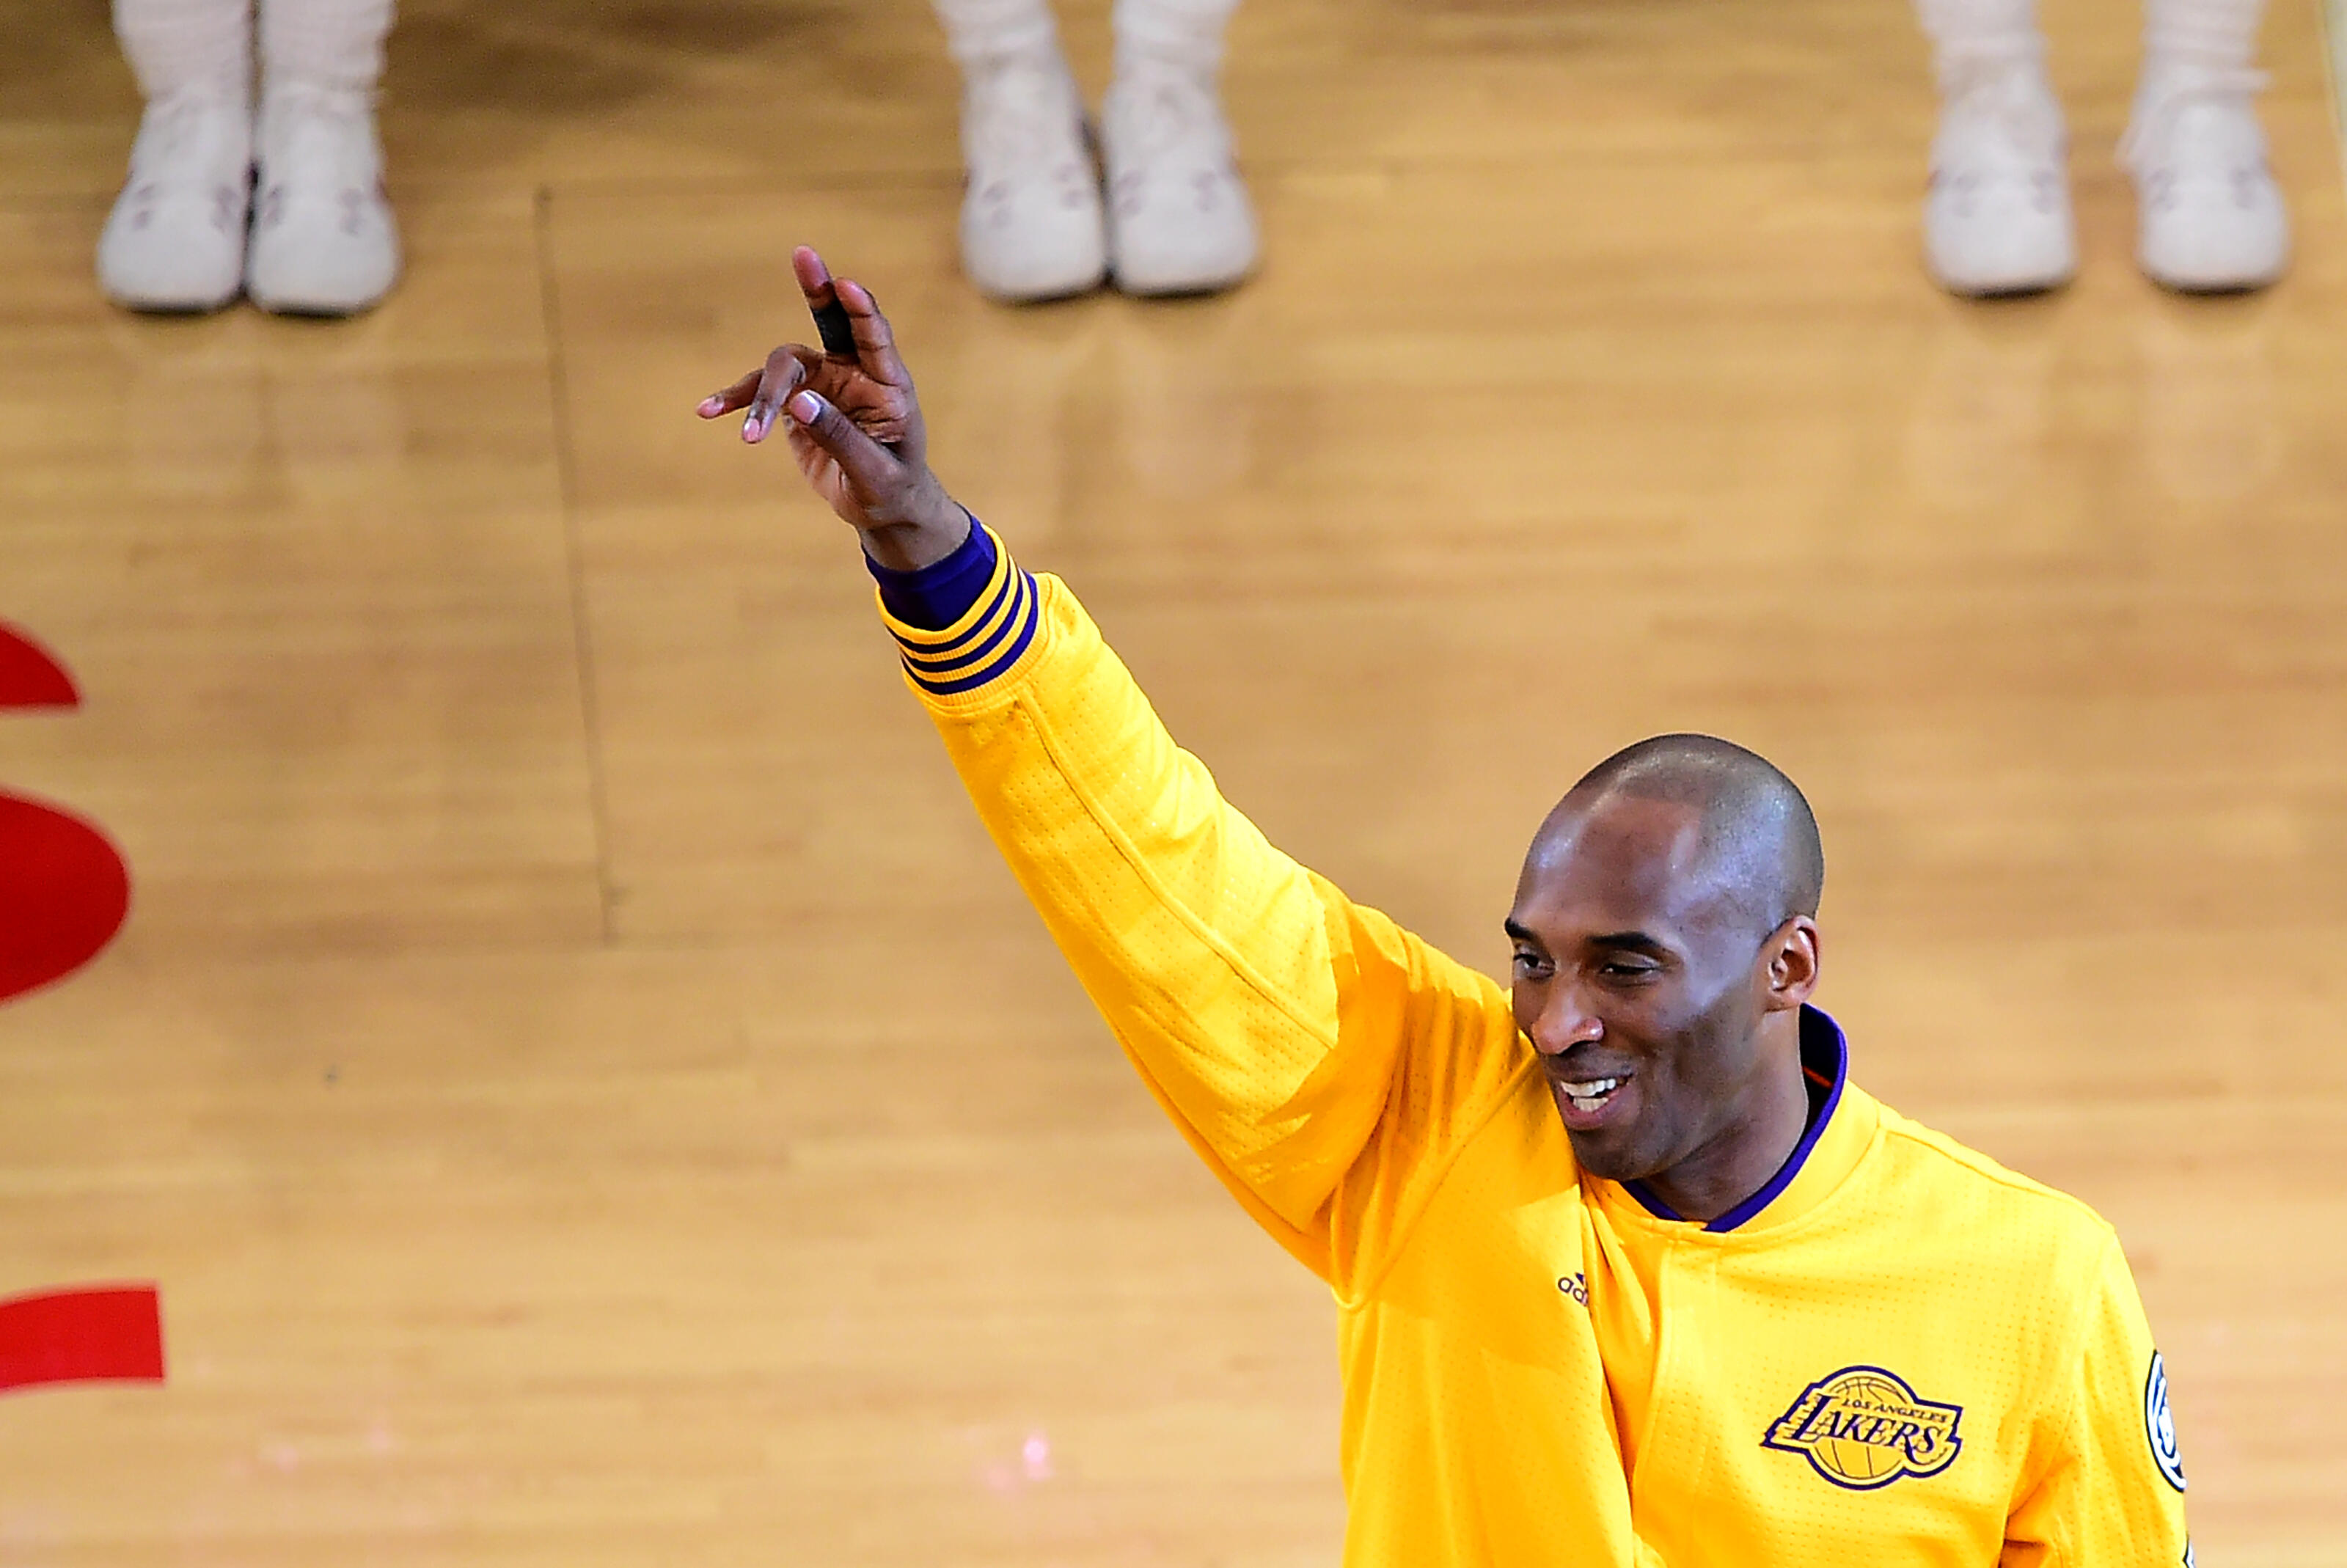 Kobe Bryant of the Los Angeles Lakers gestures to fans ahead of his final game as a Laker in their season-ending NBA western division matchup aainst the Utah Jazz in Los Angeles, California on April 13, 2016. / AFP / FREDERIC J. BROWN        (Photo credit